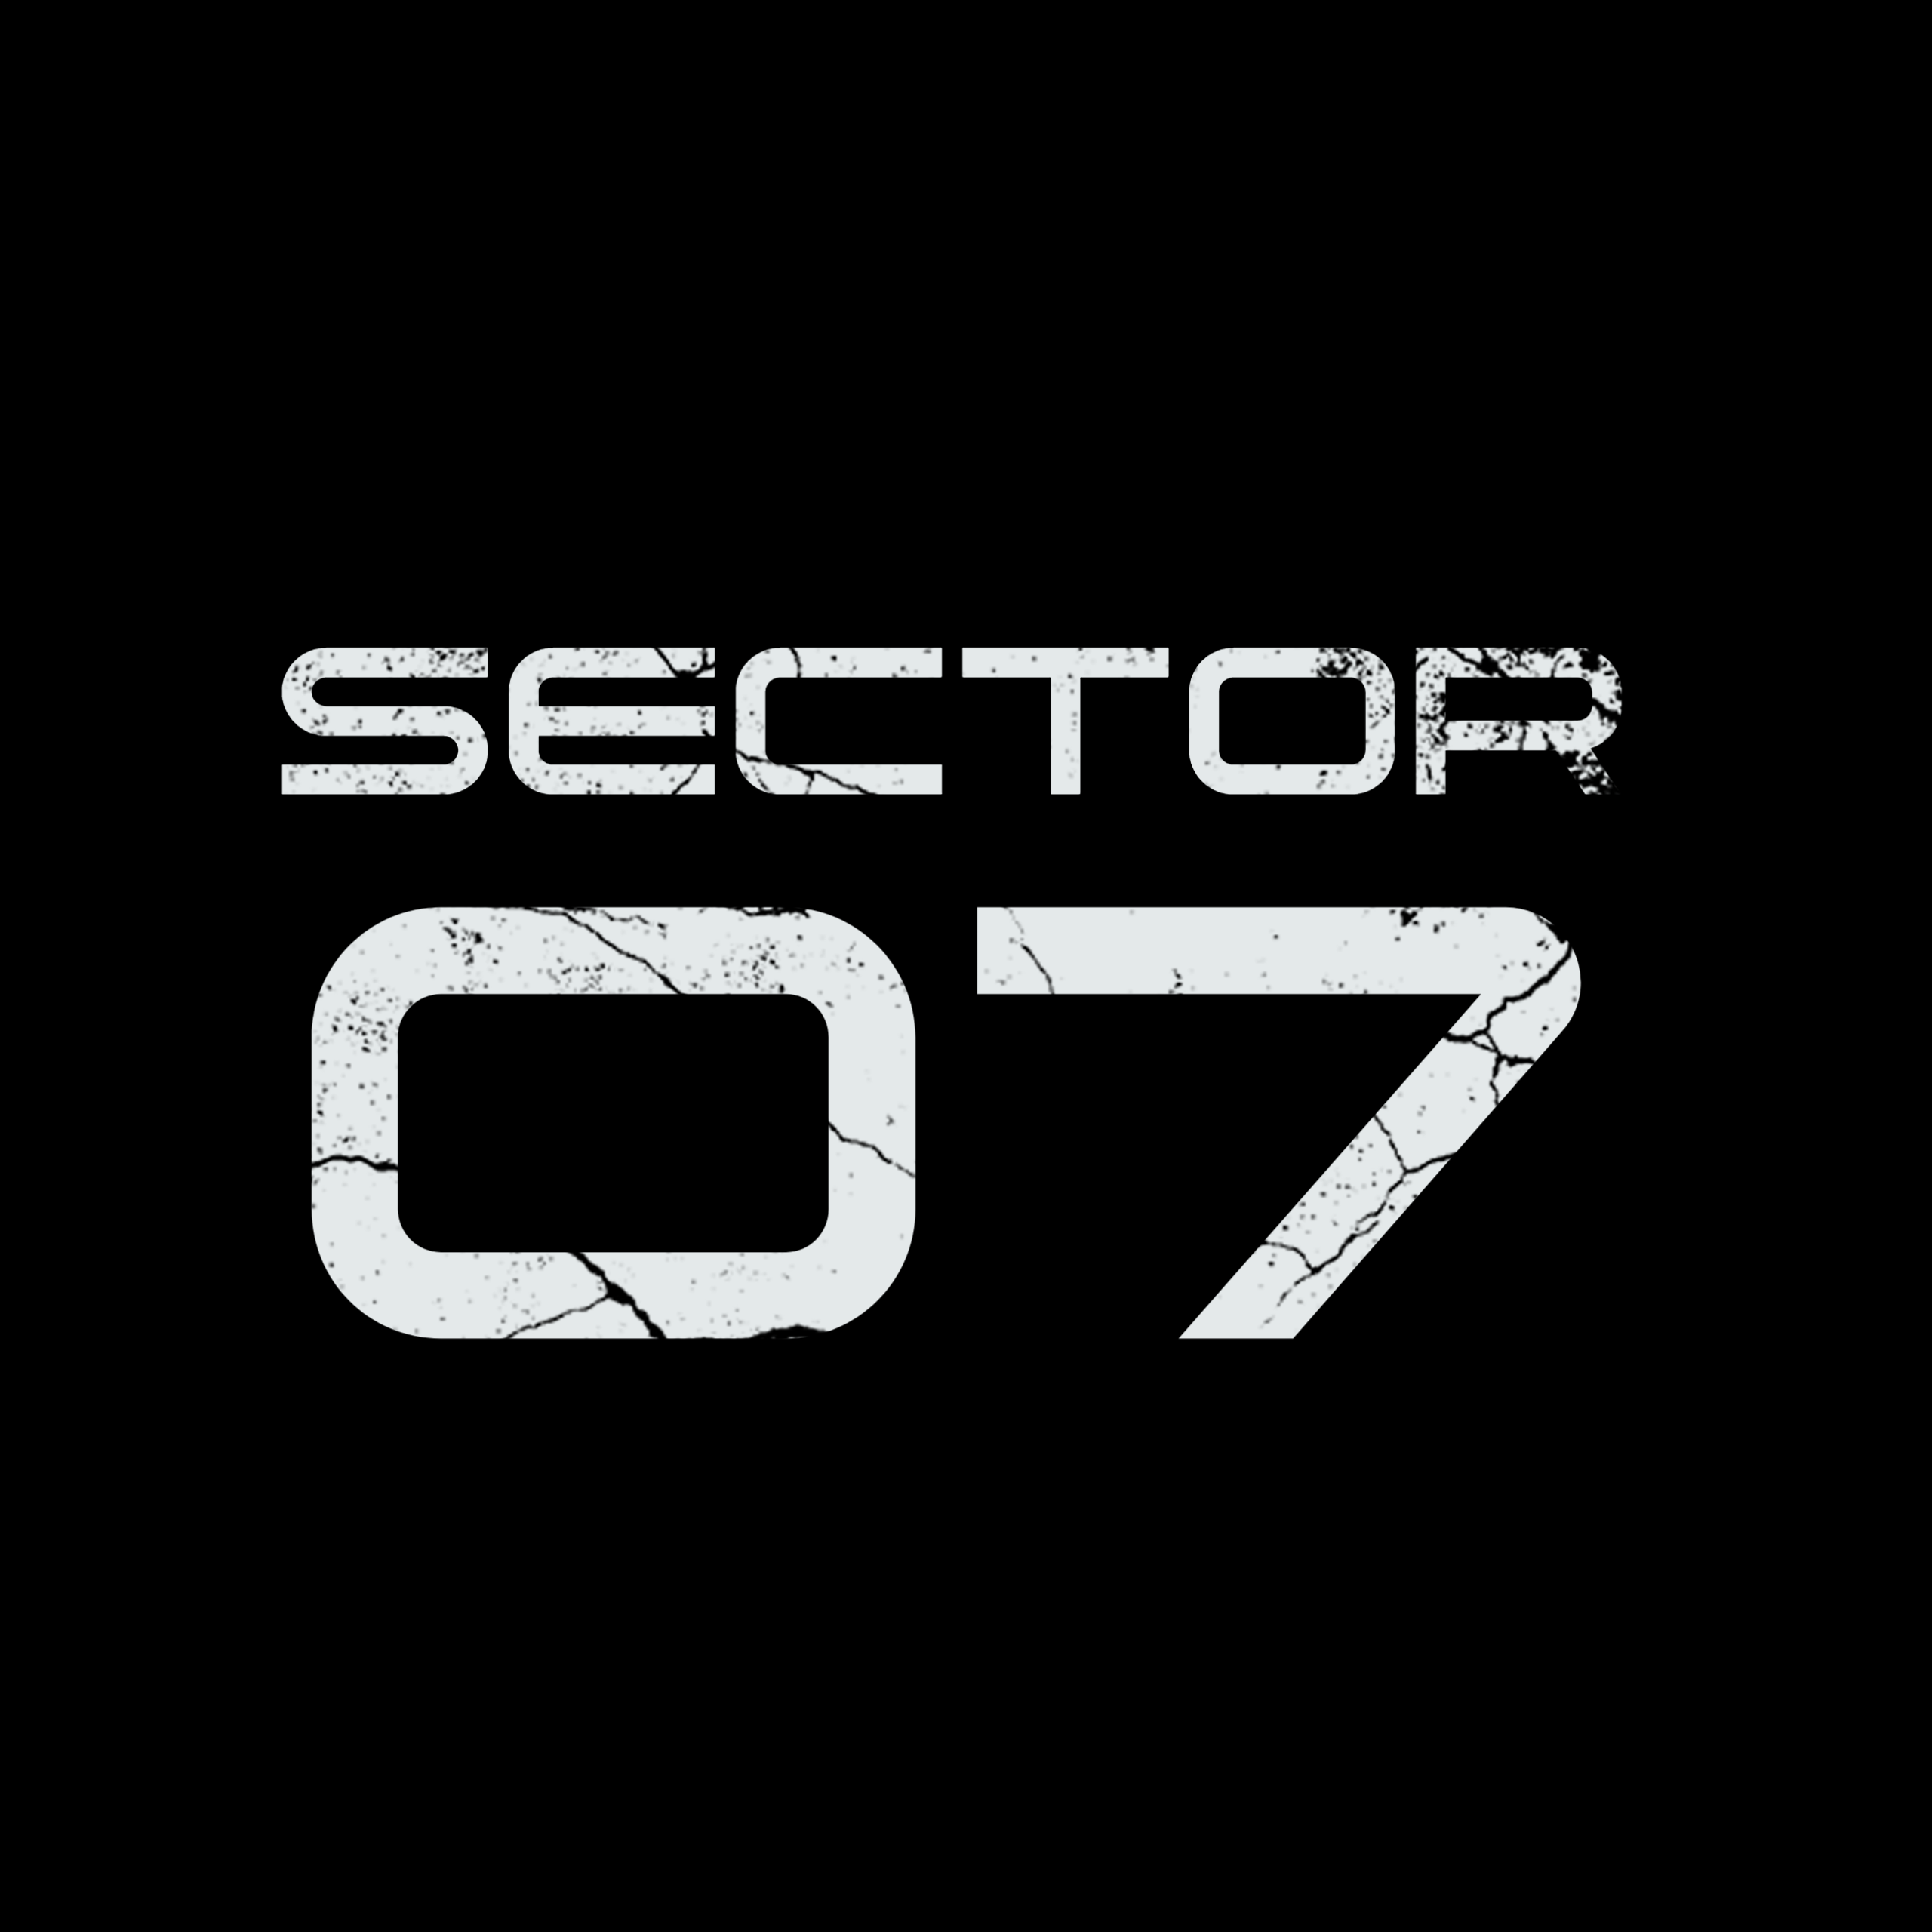 SECTOR 07